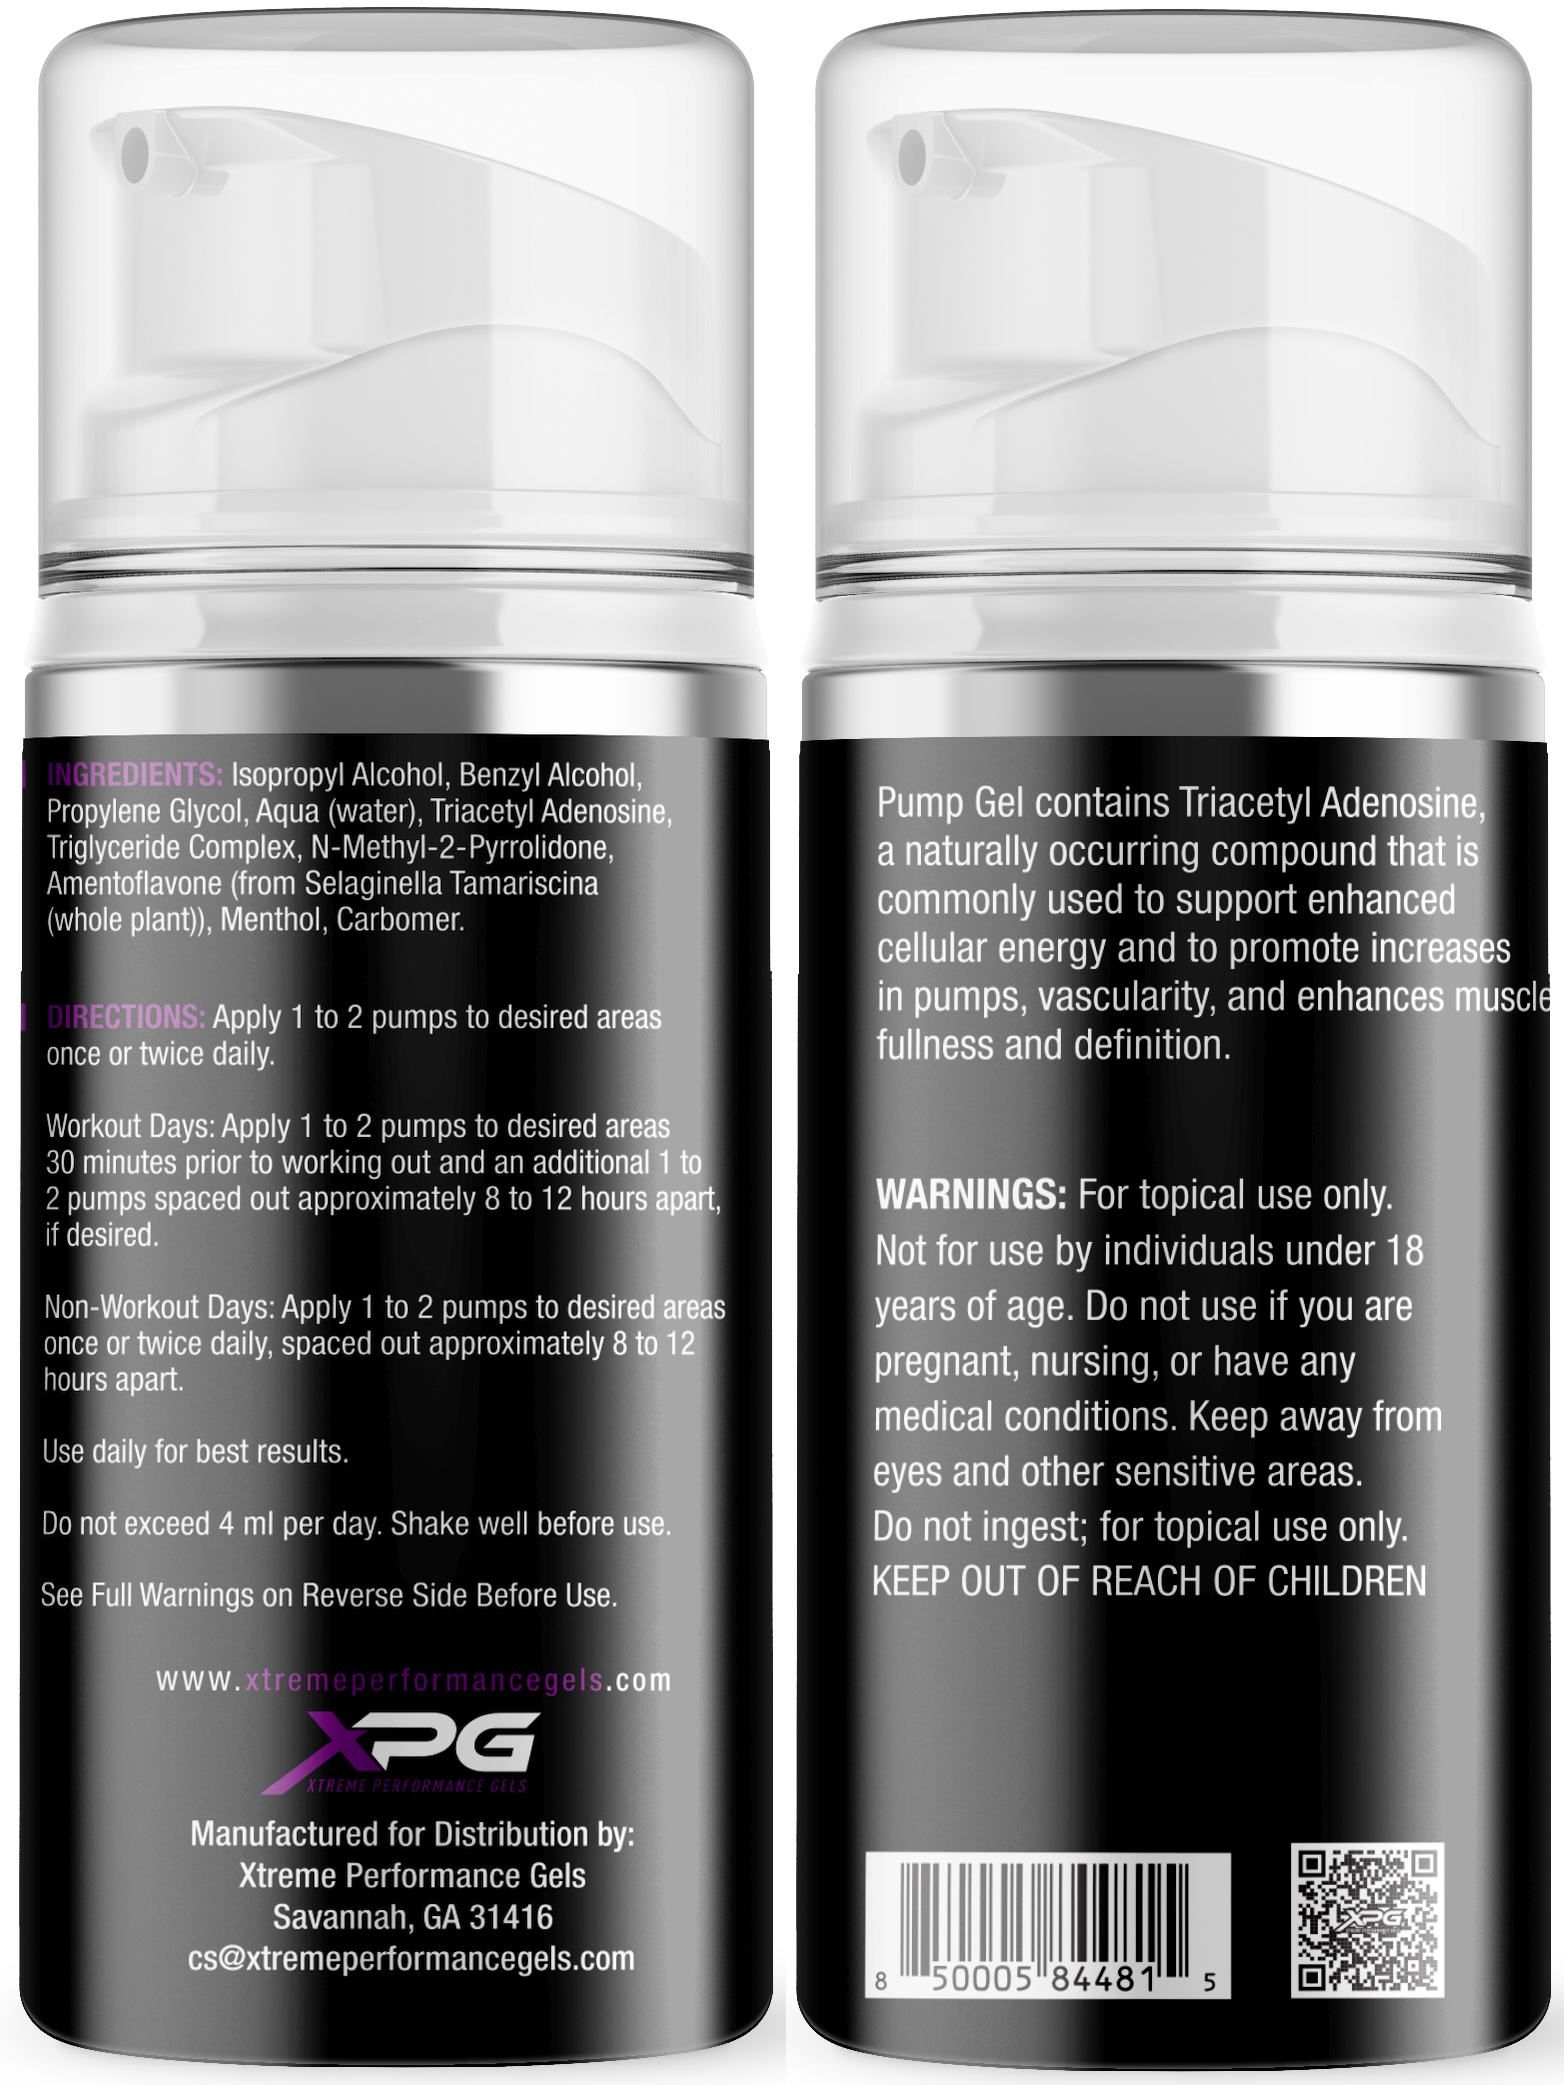 Pump Gel's ingredients list with instructions on usage for workout and non-workout days. Product enhances cellular energy and muscle fullness.